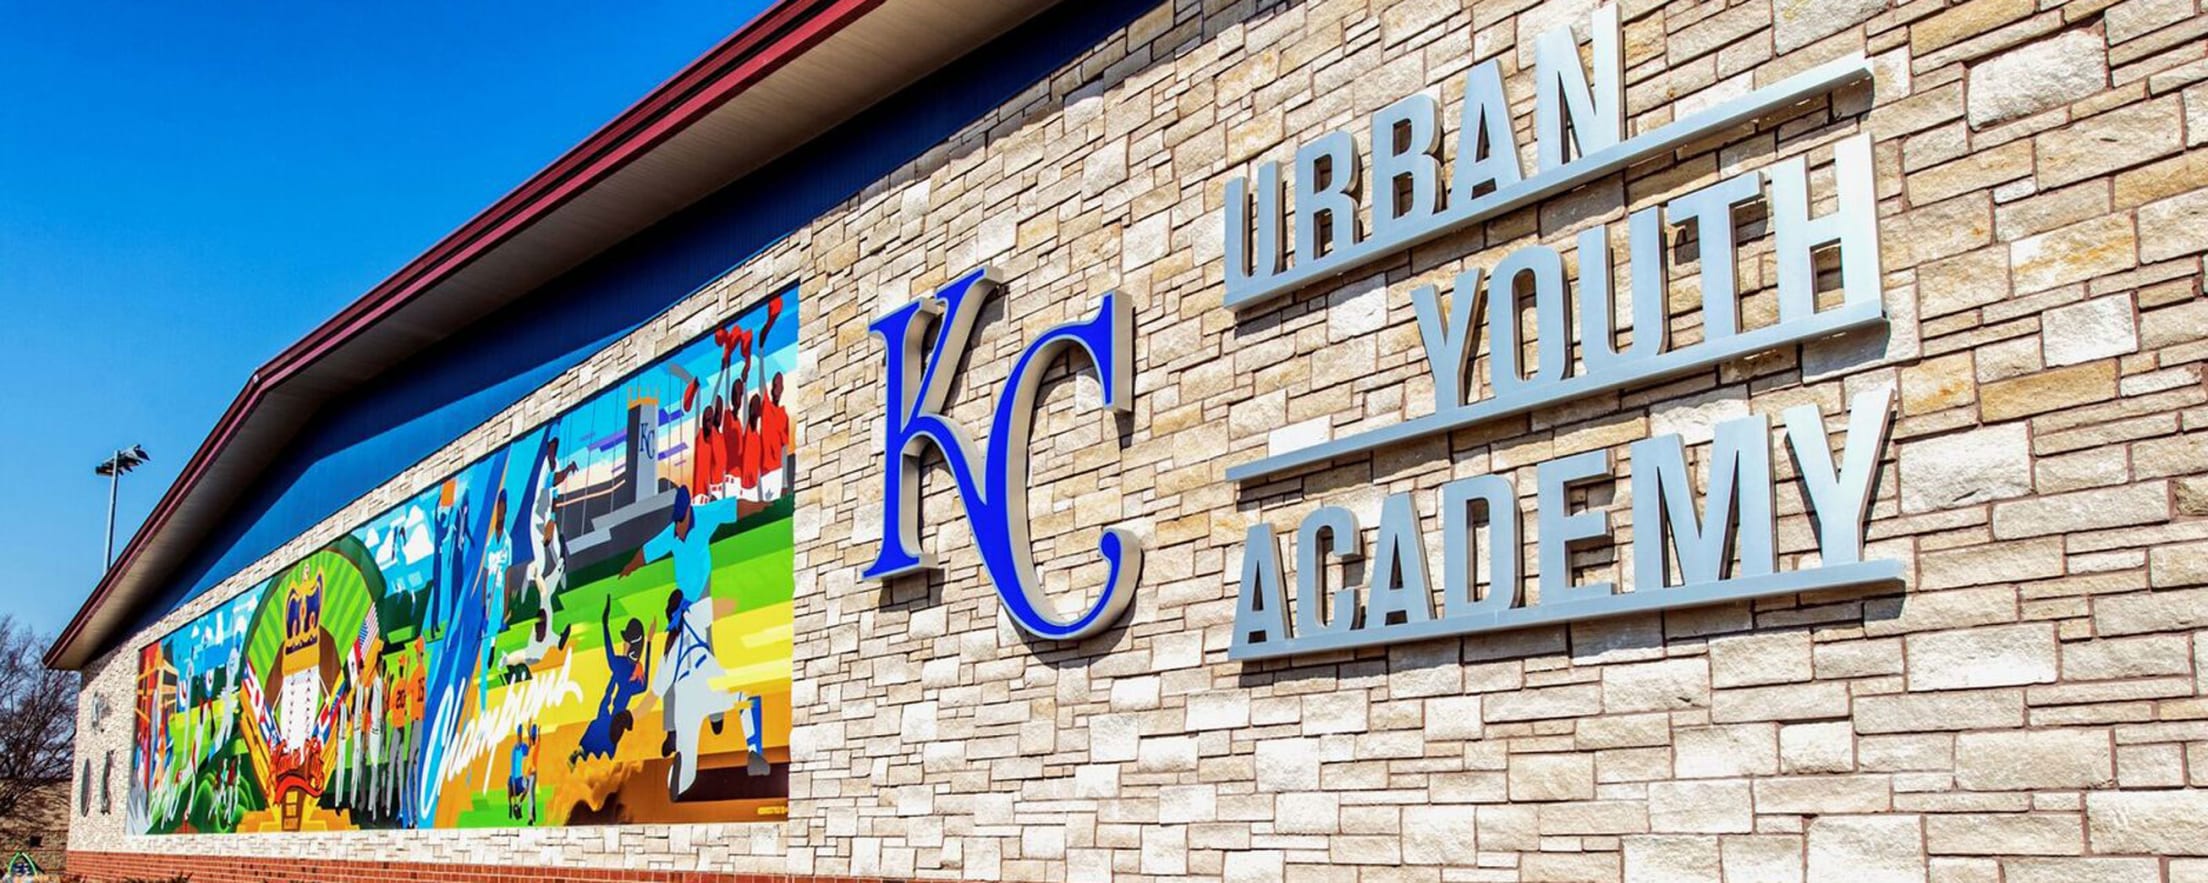 Imagining a Royals Baseball Academy 2.0 (with the help of the Urban Youth  Academy) – The Royals Reporter